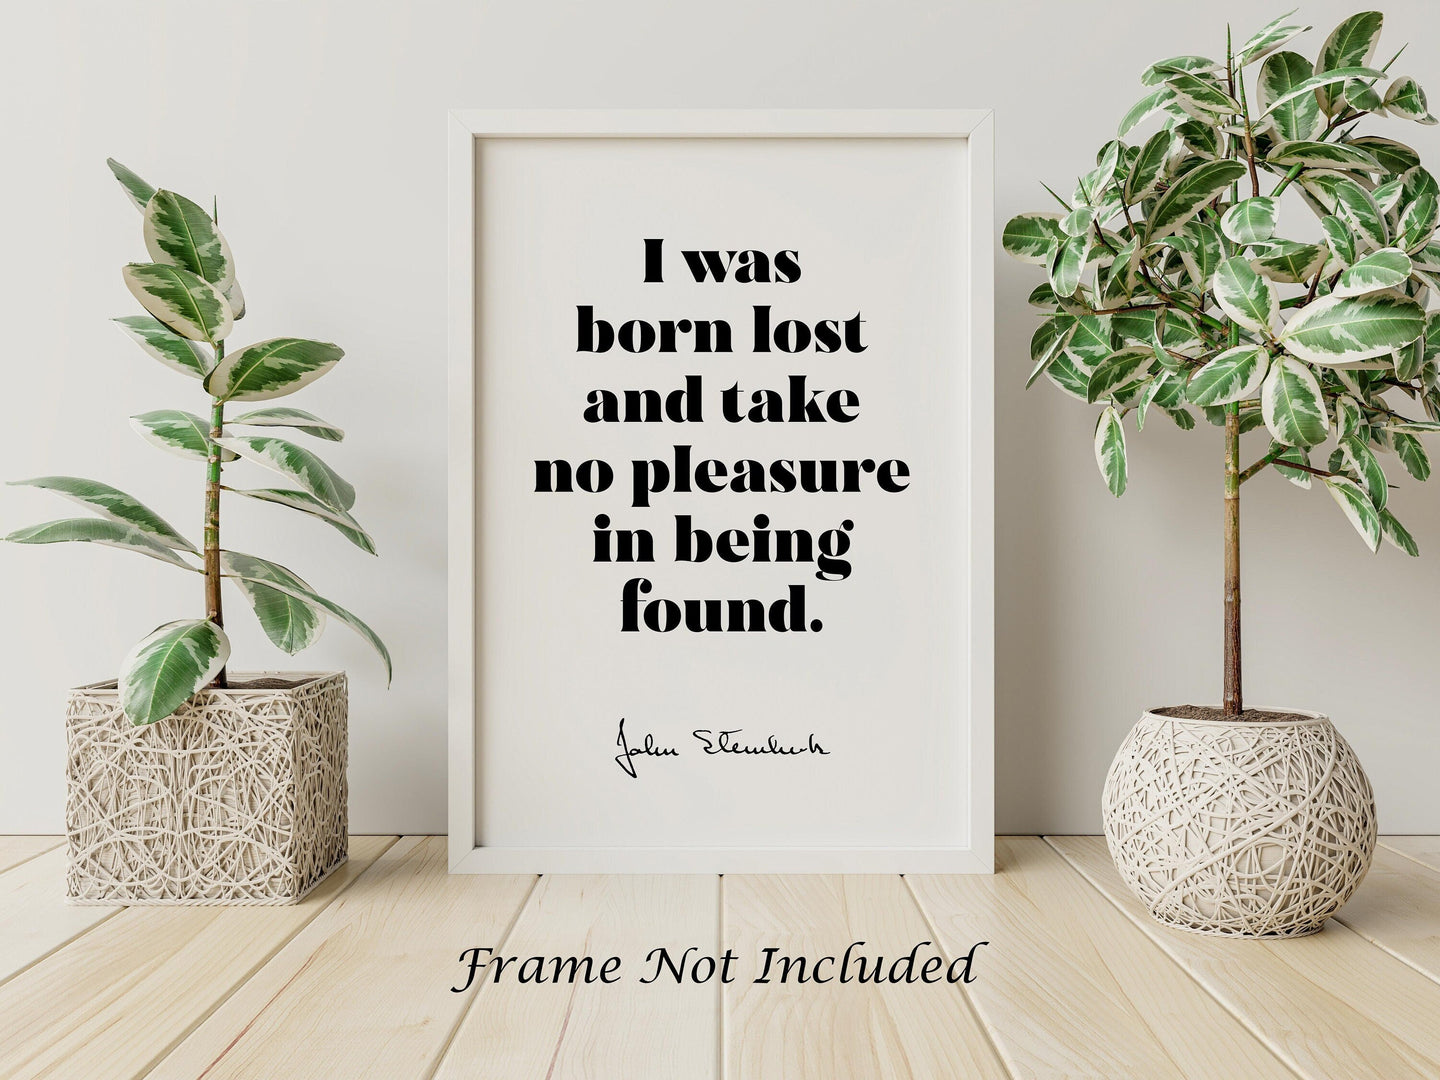 John Steinbeck - I was born lost and take no pleasure in being found - Book Quote Literary Wall Art Print - Quote From Travels With Charley